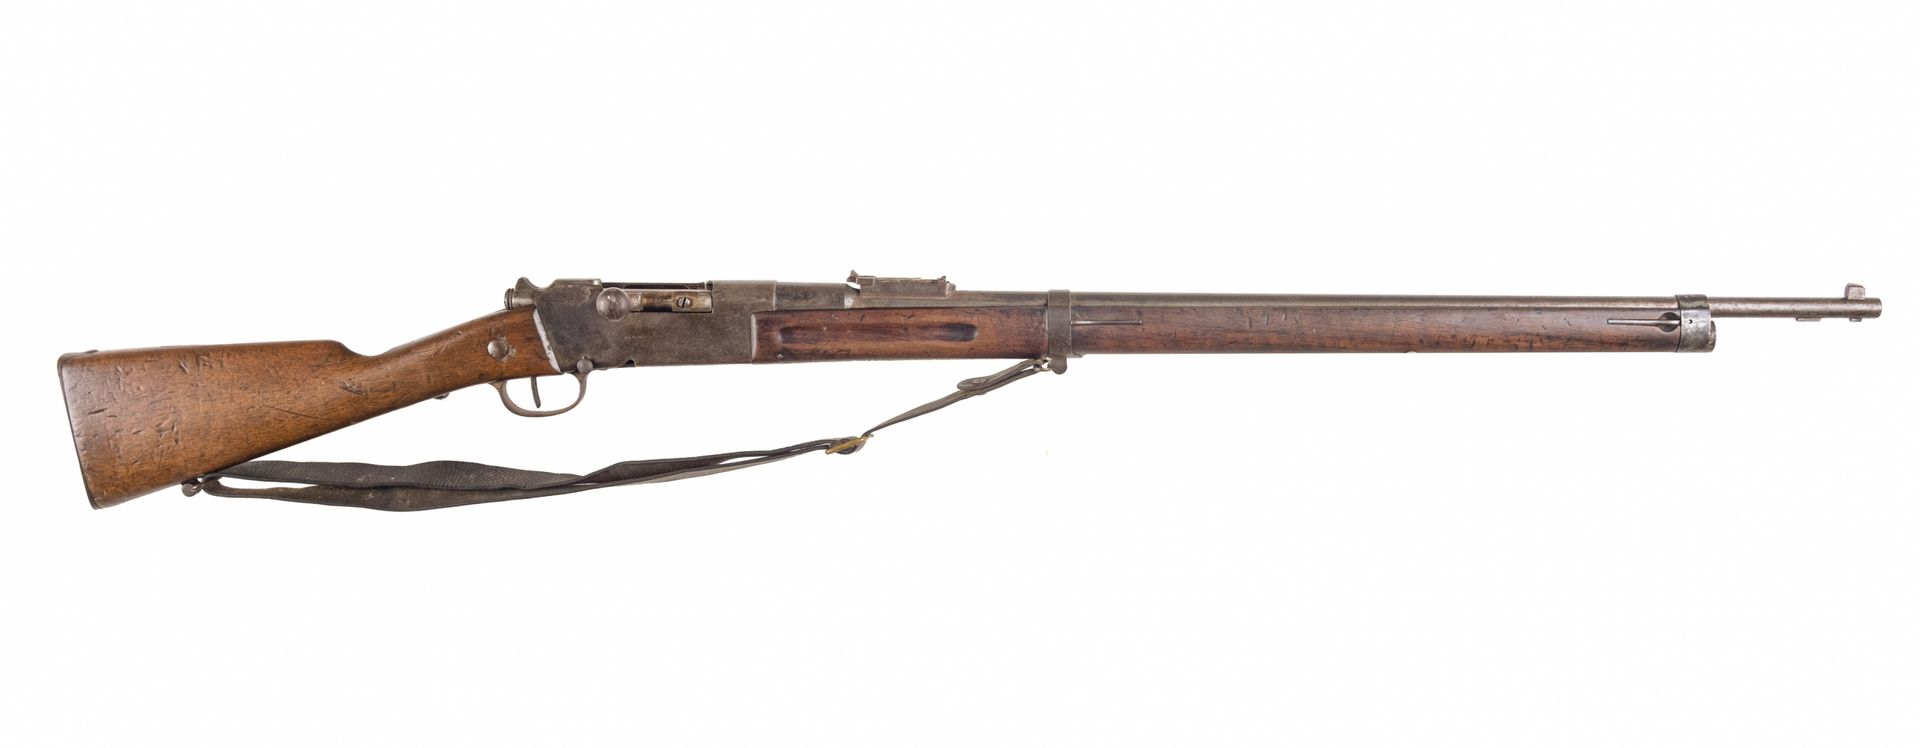 Null Lebel rifle model 1886, caliber 8 mm. 

Pinned barrel, with rise, marked MA&hellip;